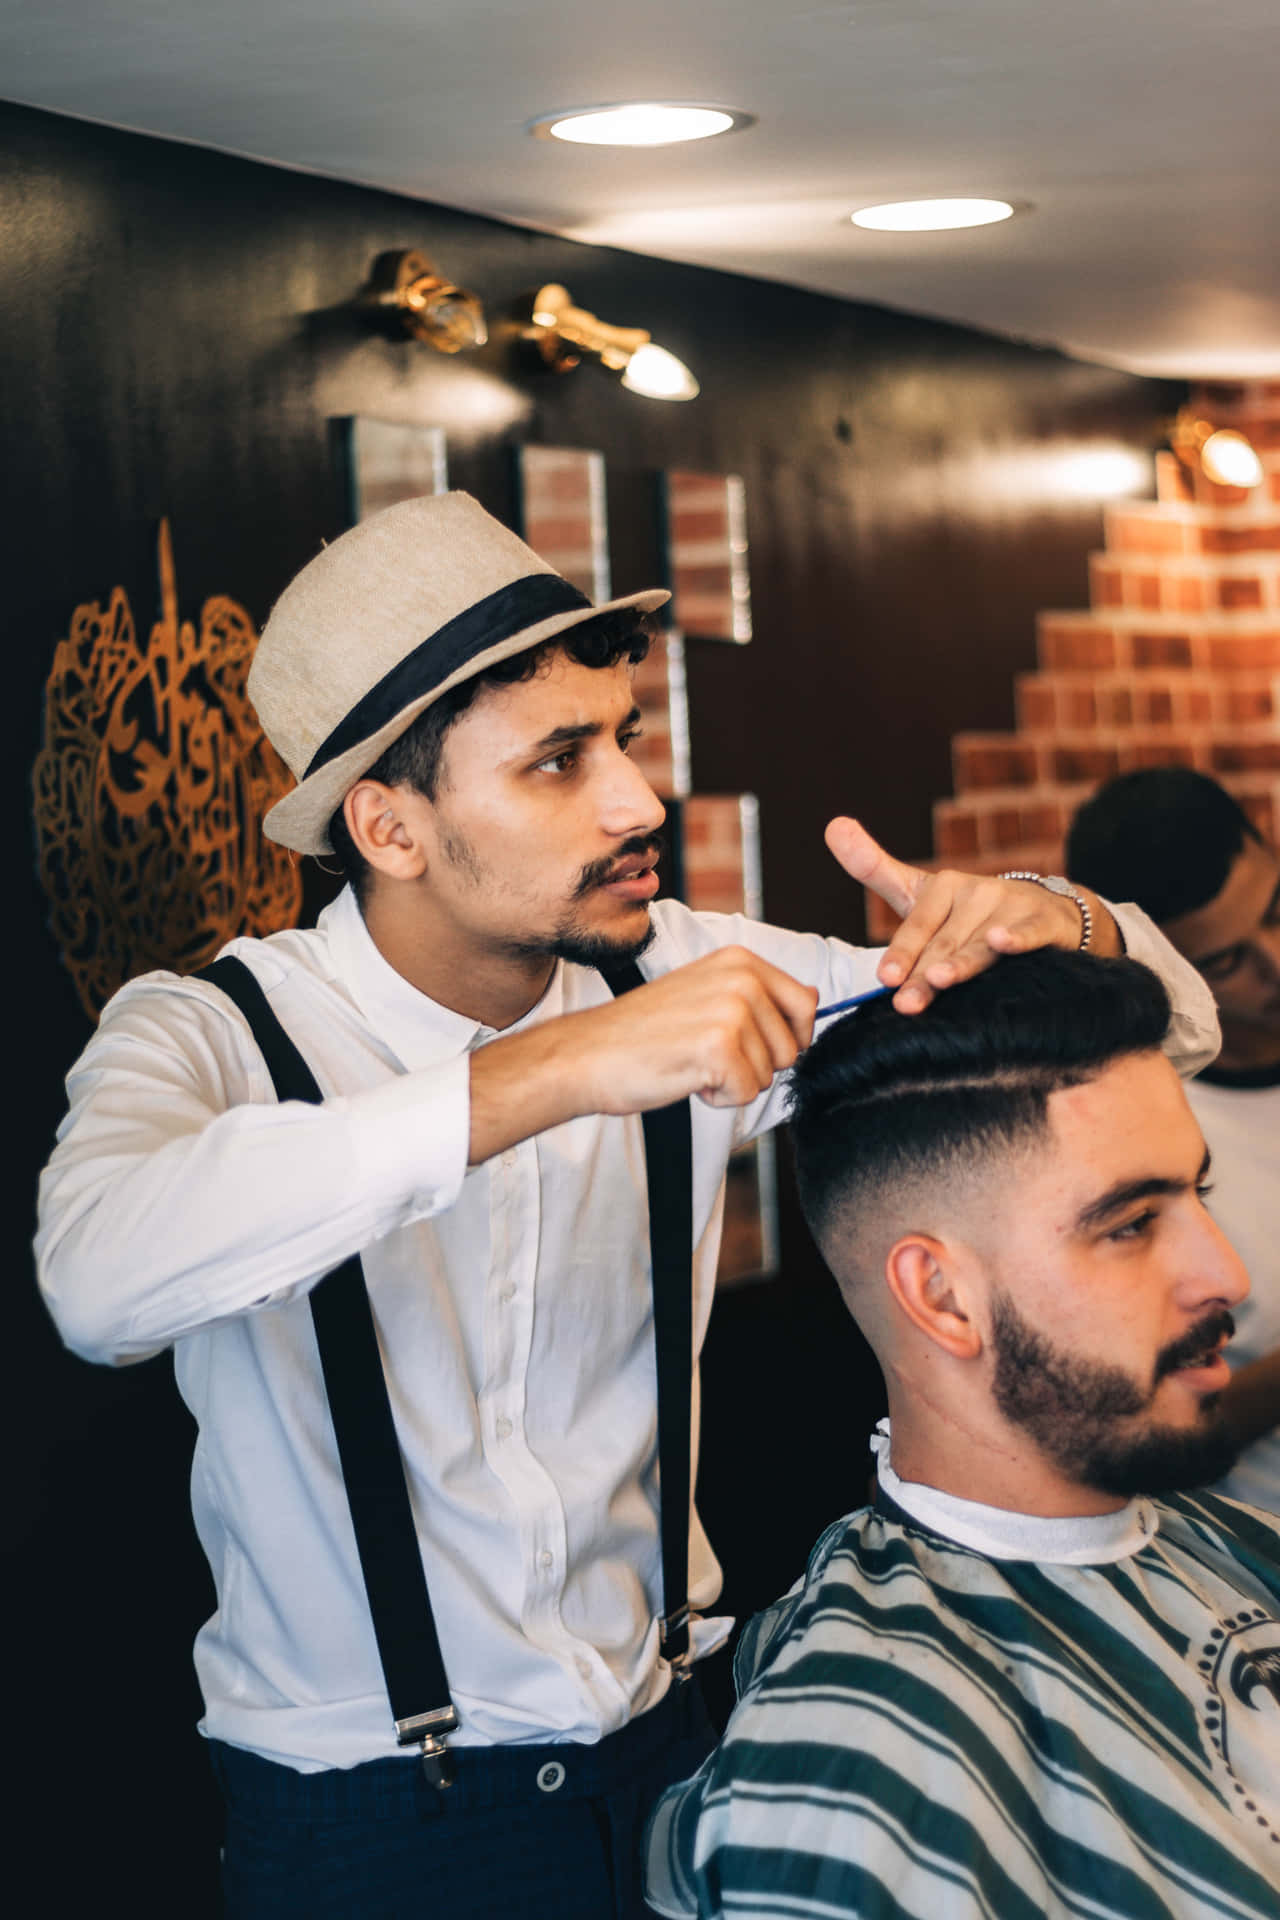 "master Barber At Work With Scissors And Comb"